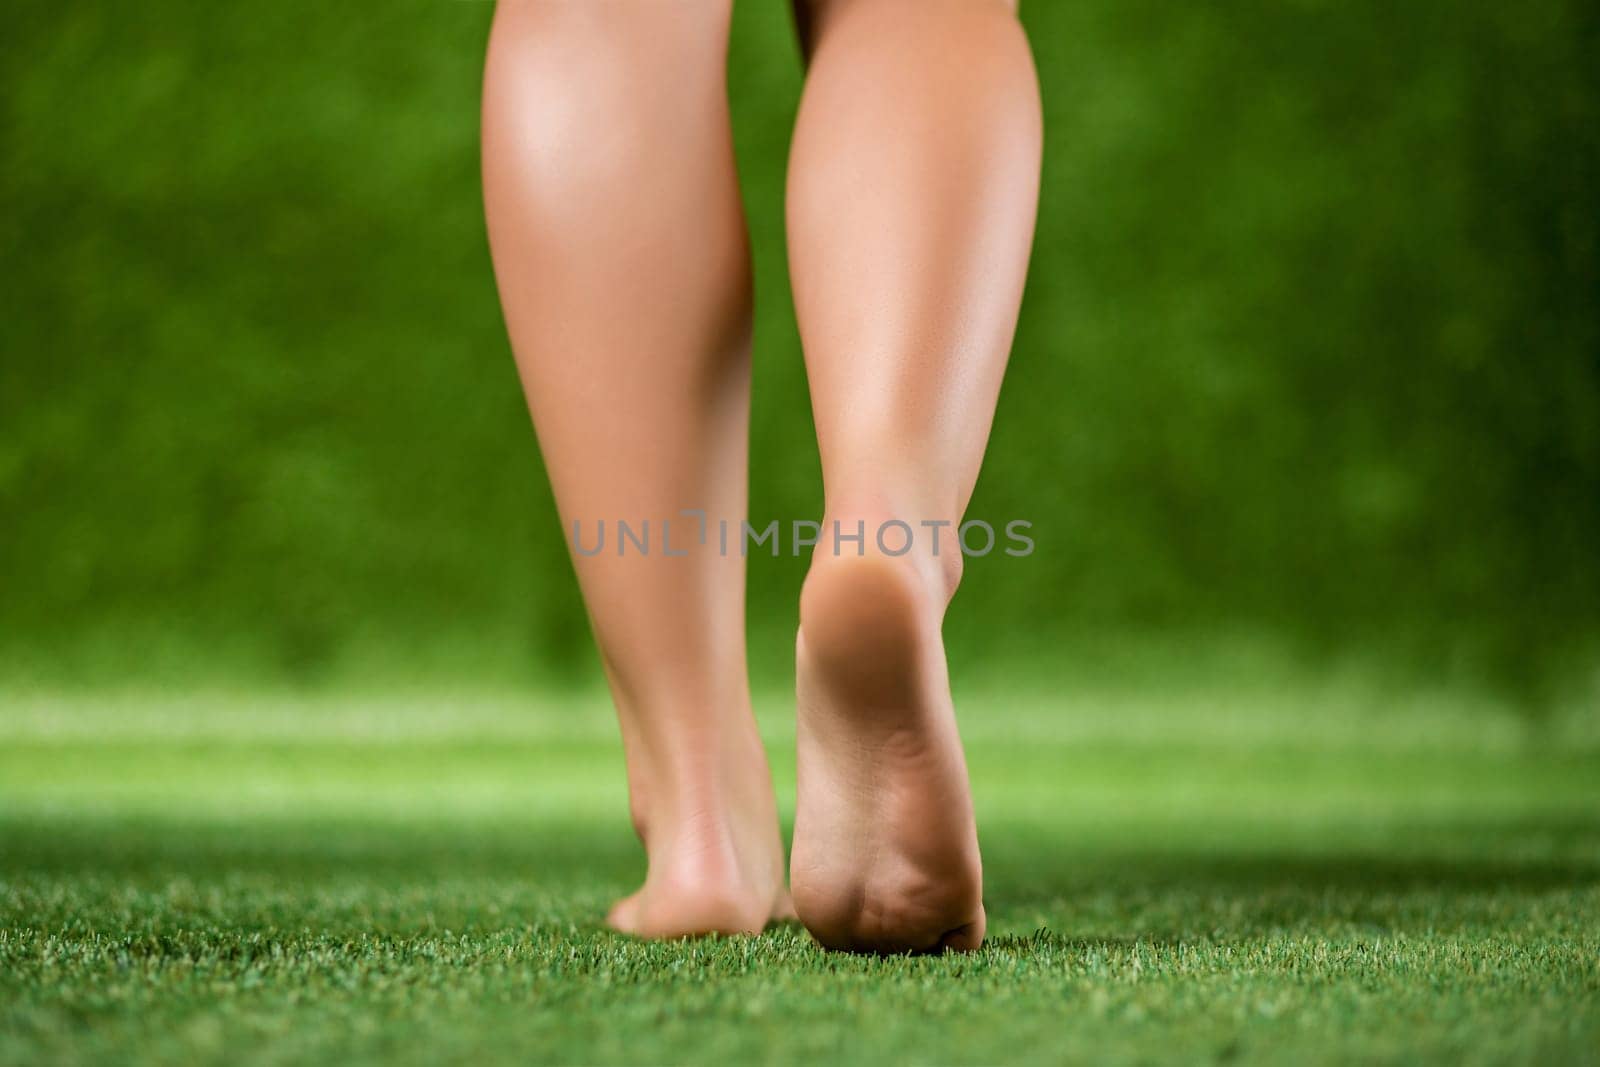 His bare feet beautiful woman close up are on a grass. by nazarovsergey